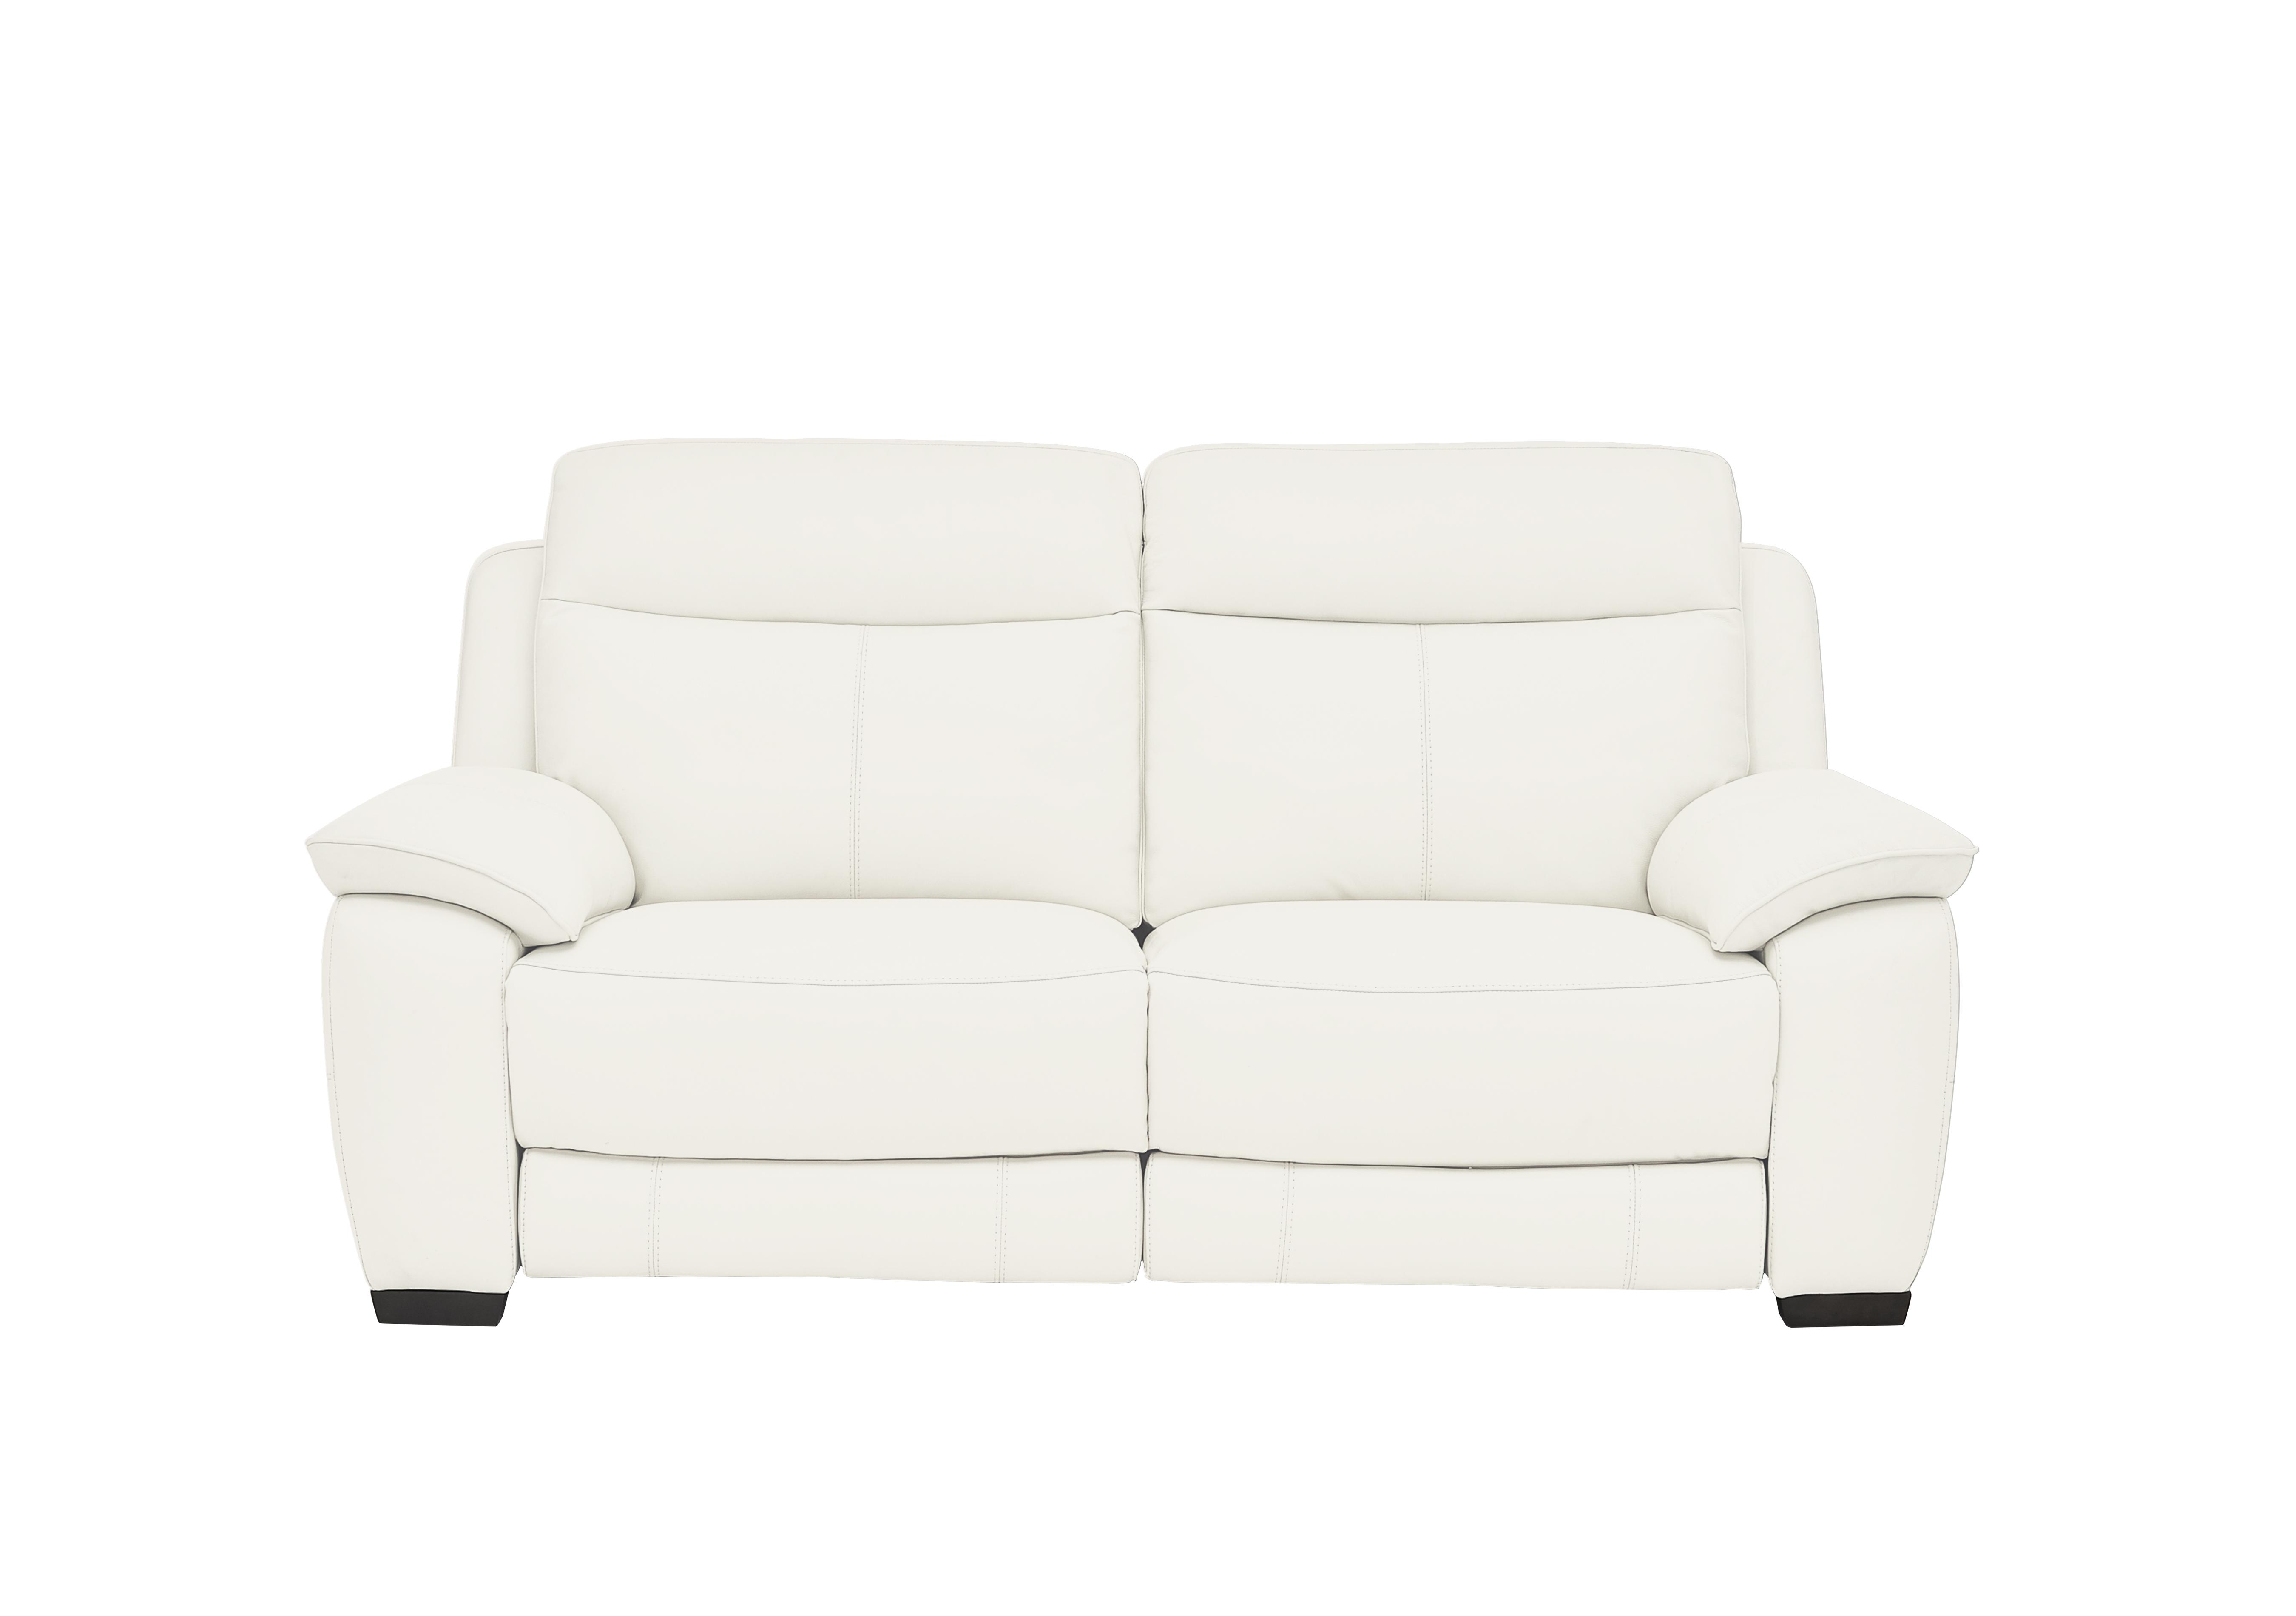 Starlight Express 2 Seater Leather Recliner Sofa with Power Headrests in Bv-744d Star White on Furniture Village